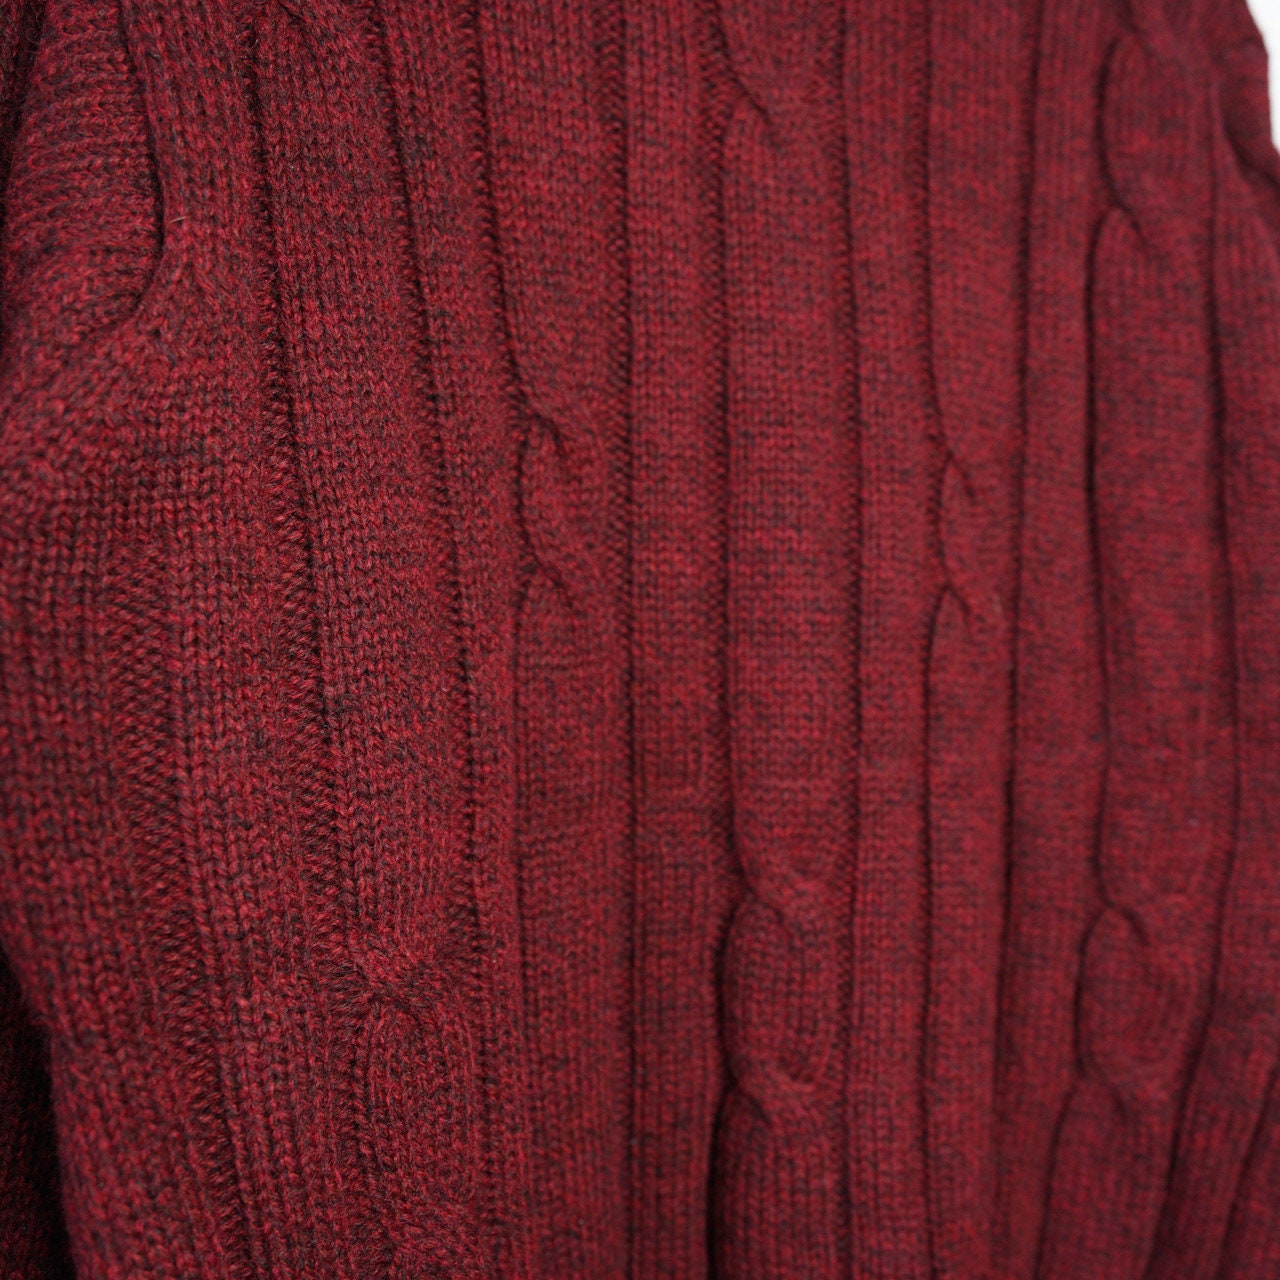 Vintage red wool Pullover Size M red